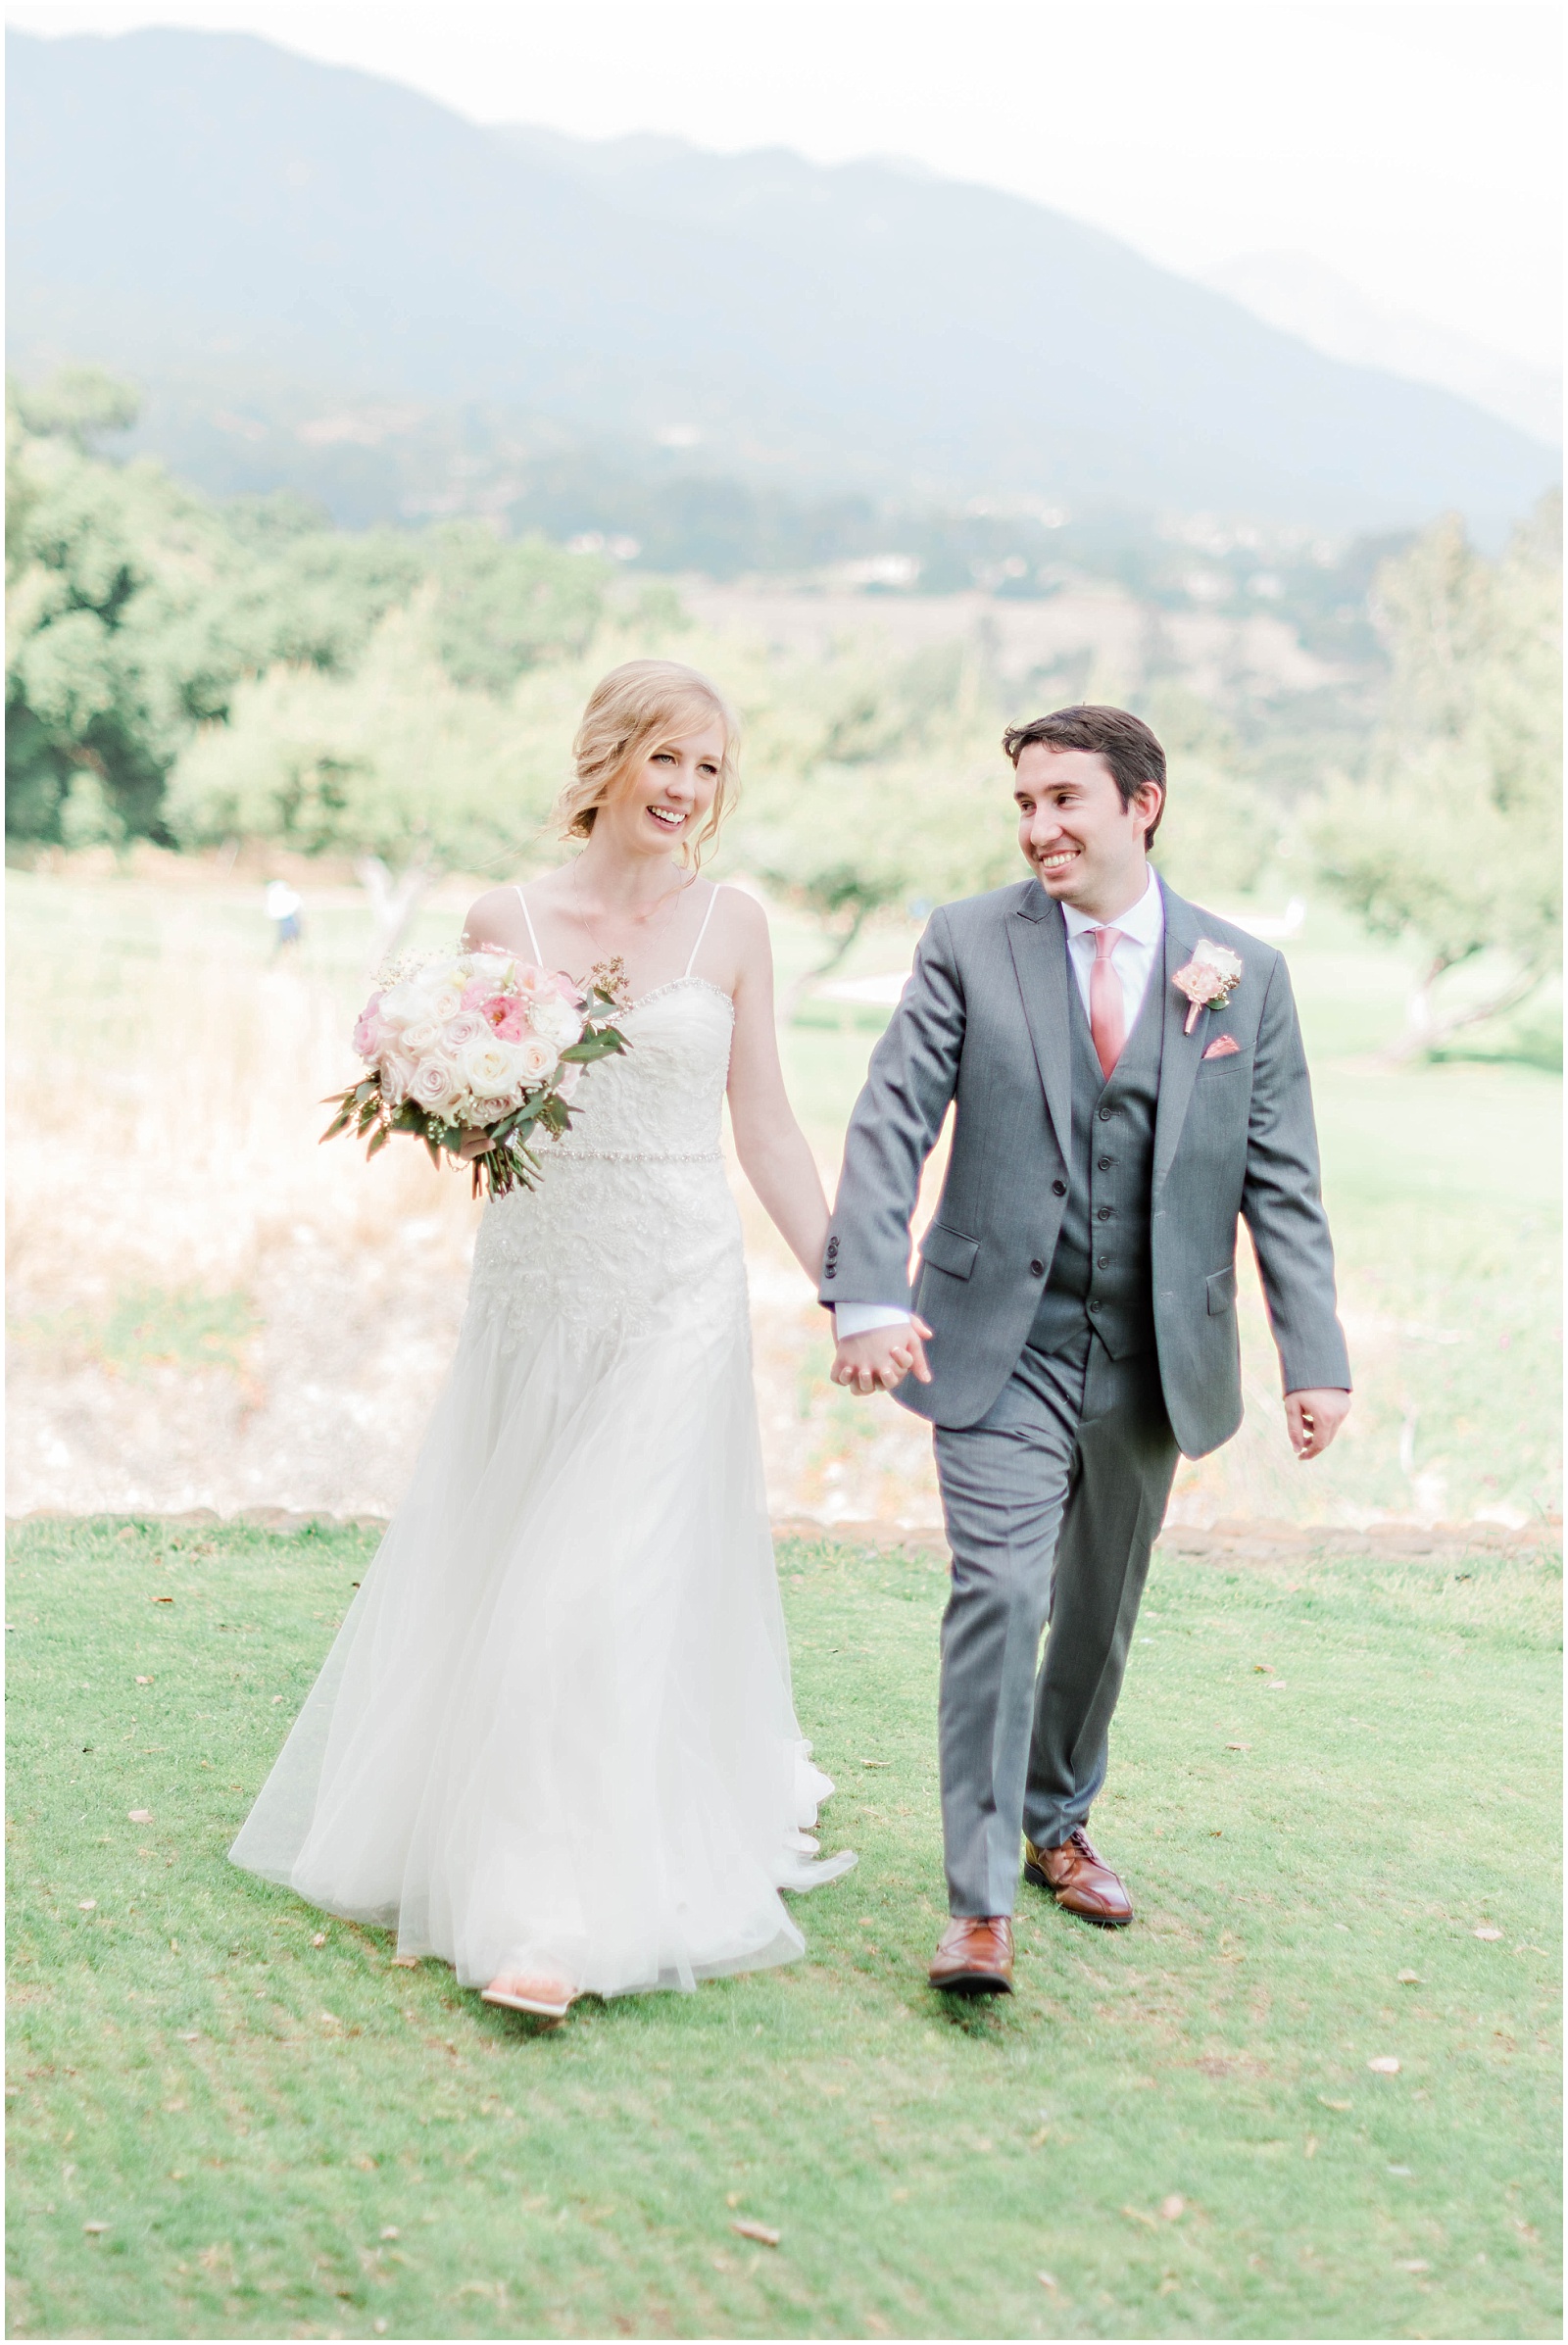 San Dimas Country Club Wedding. Photography by Mollie Jane Photography. To see more go to www.molliejanephotography.com